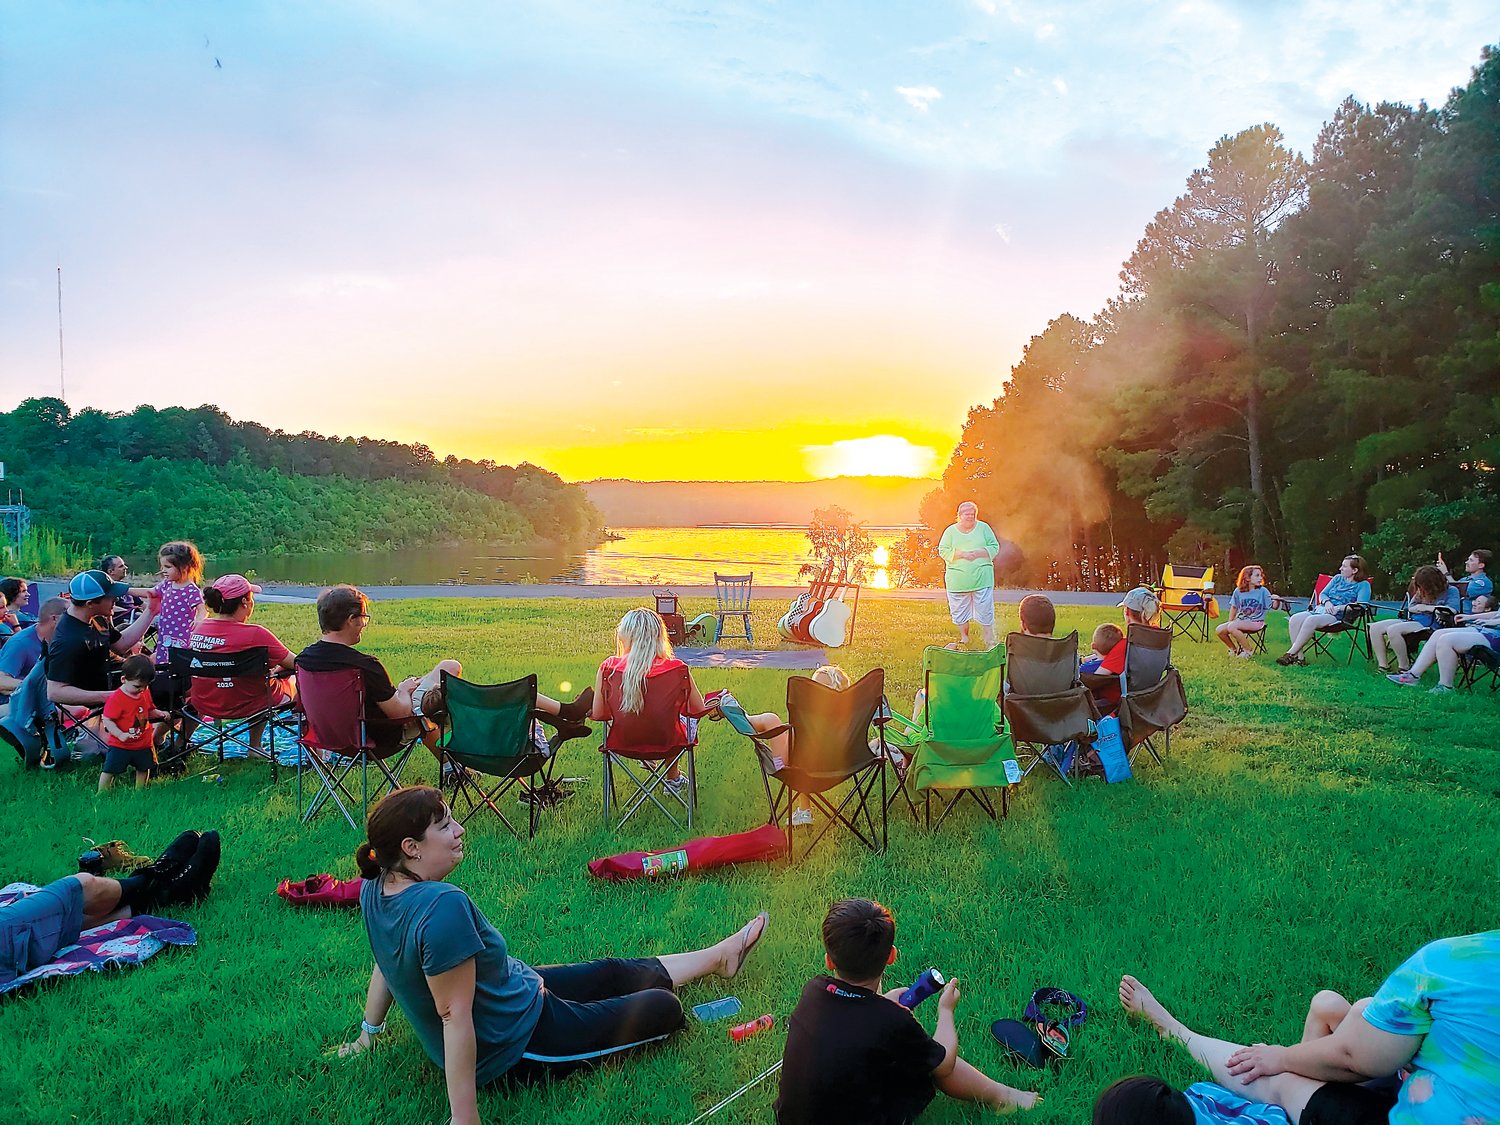 Campers gathered at the Great Chatham County Camp Out at Jordan Lake on June 26, one of the featured events on the Chatham 250 Passport program.